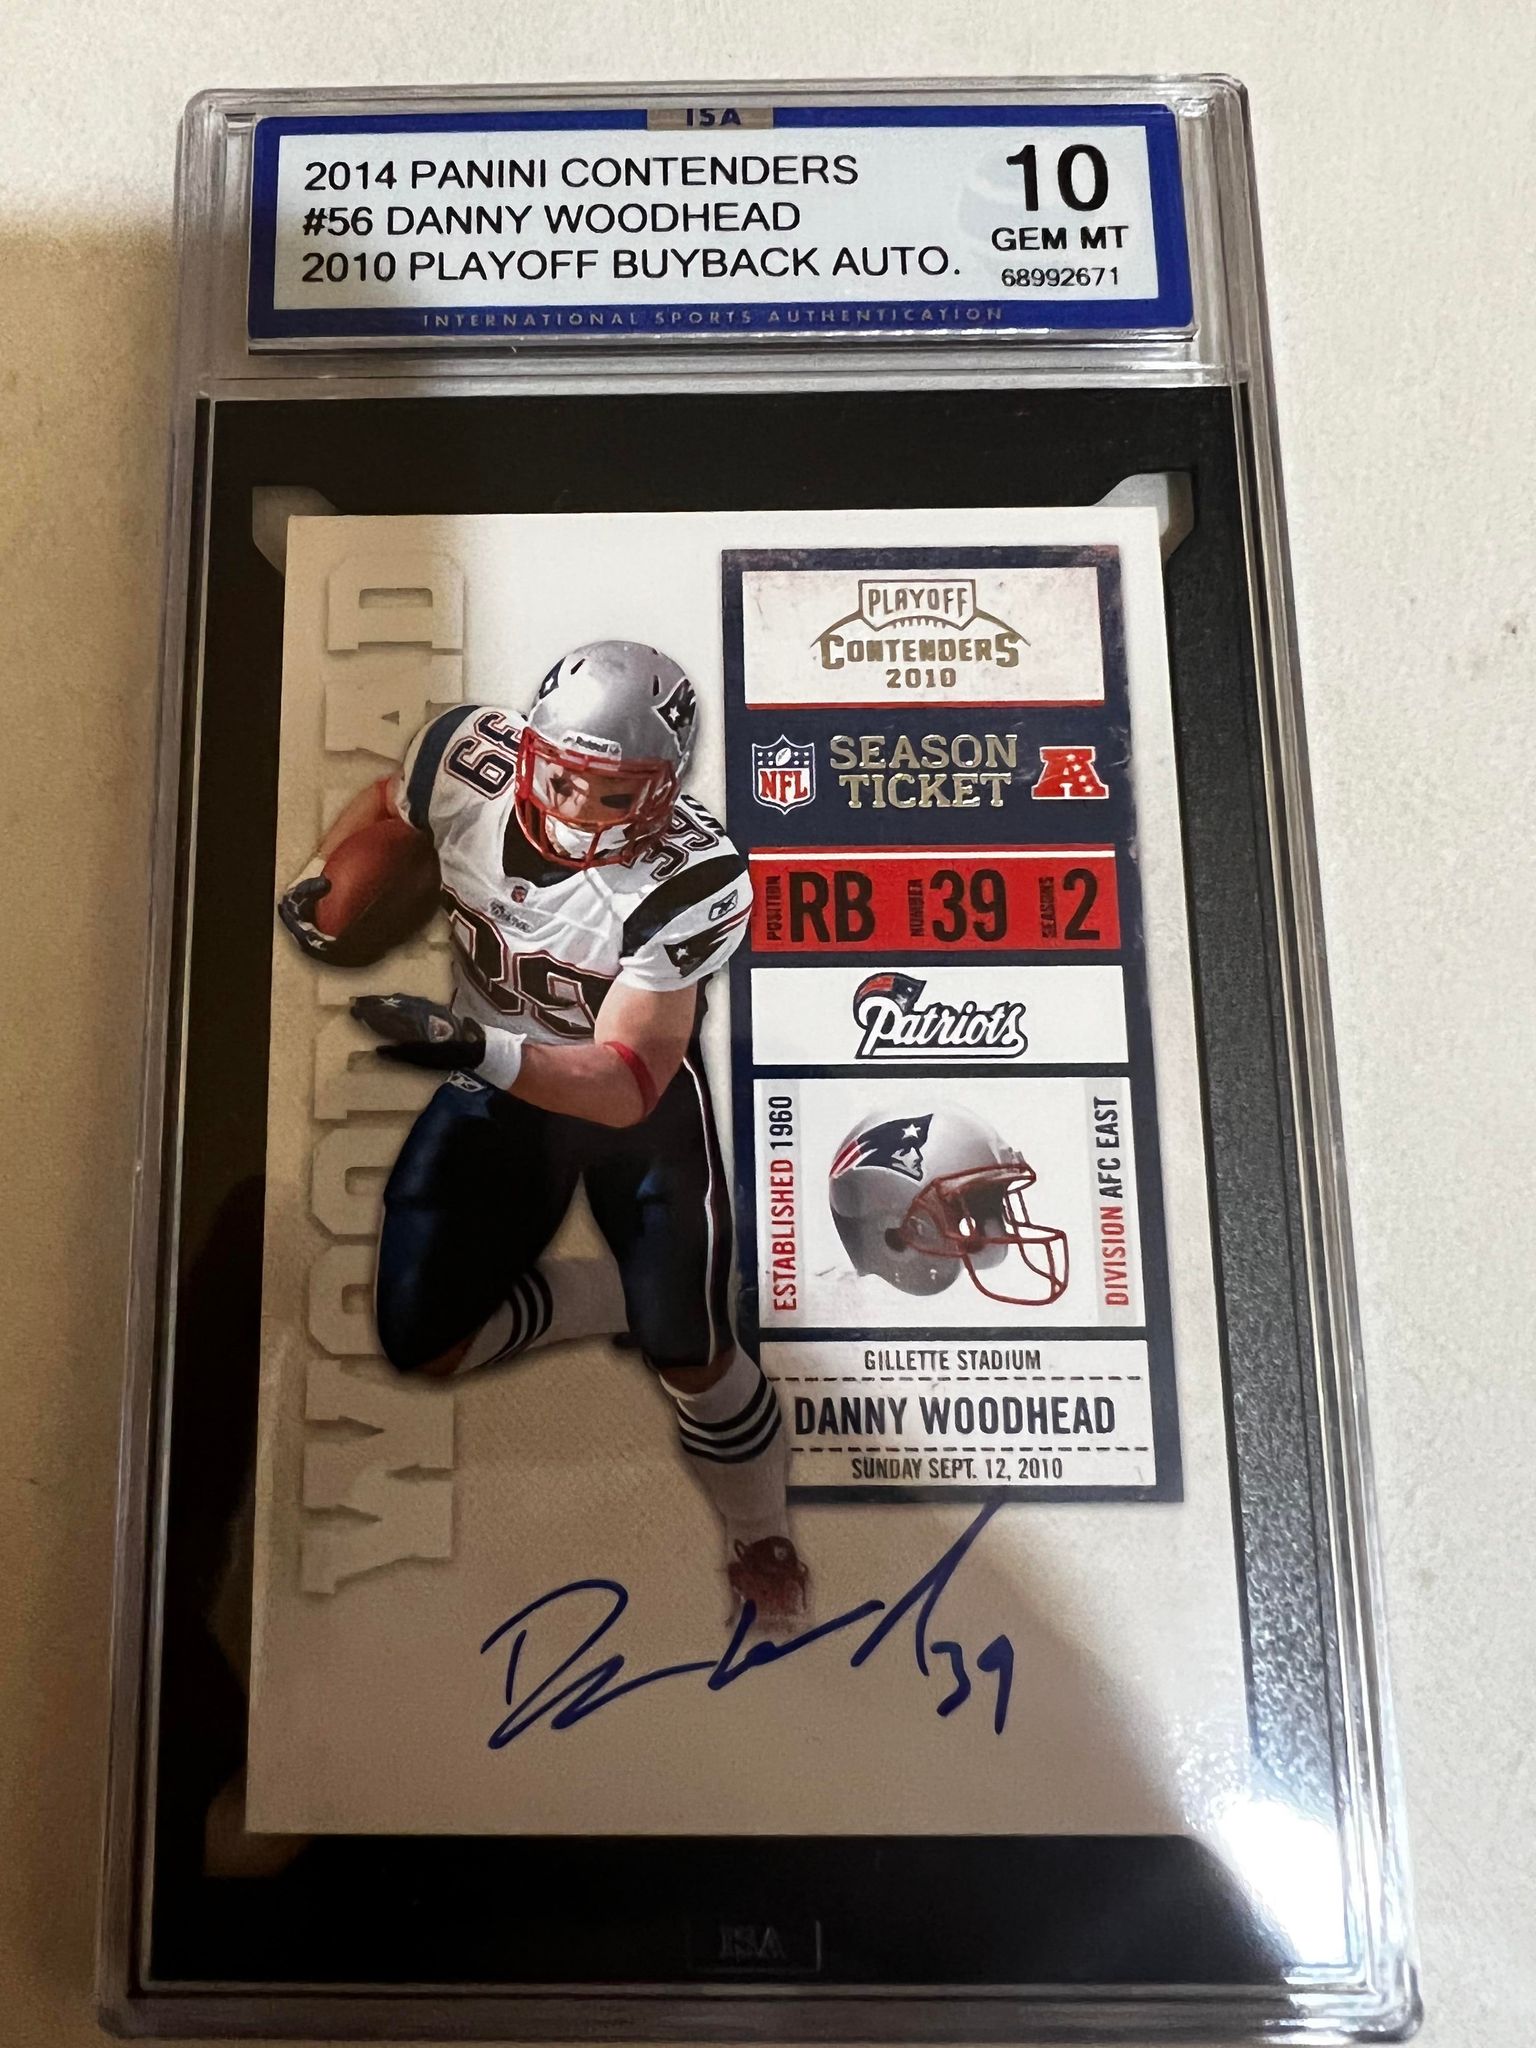 2014 Playoff Contenders Danny Woodhead RC Buy-Back Auto ISA Gem Mint 10 /39